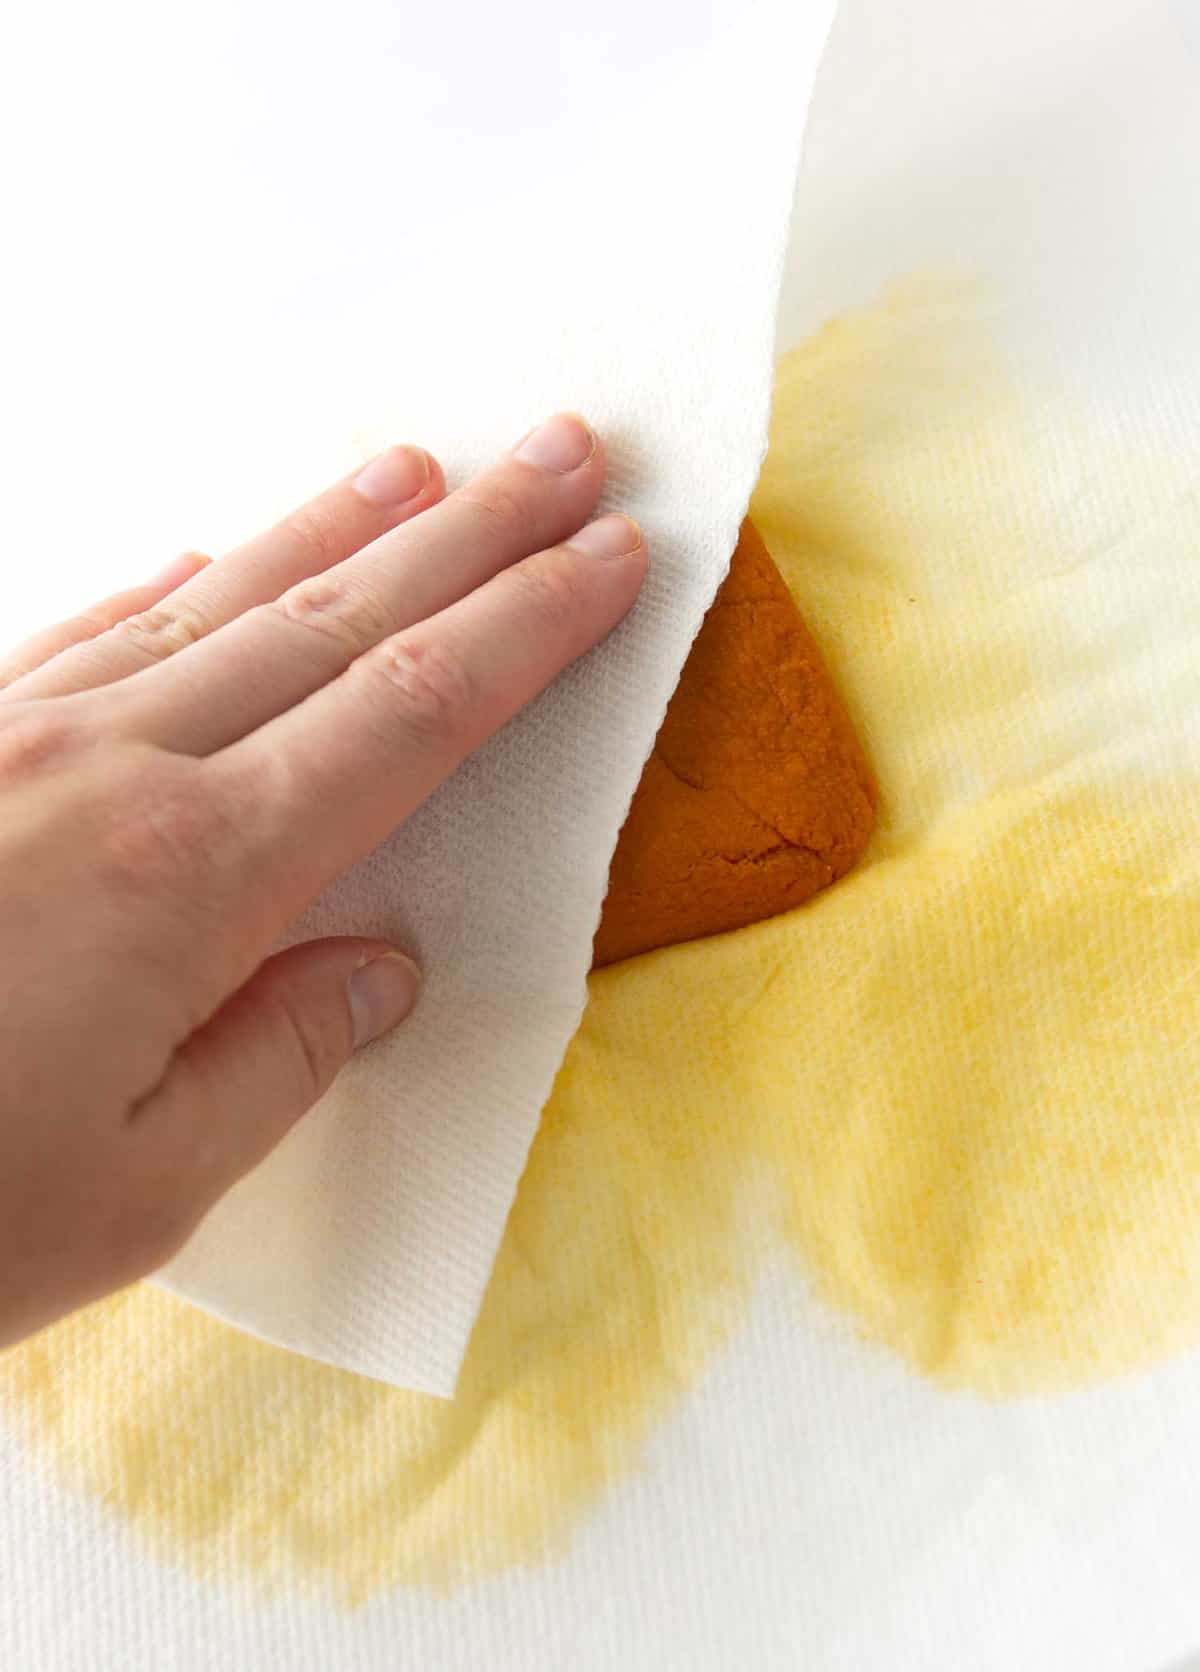 blotting water out of pumpkin puree with paper towel